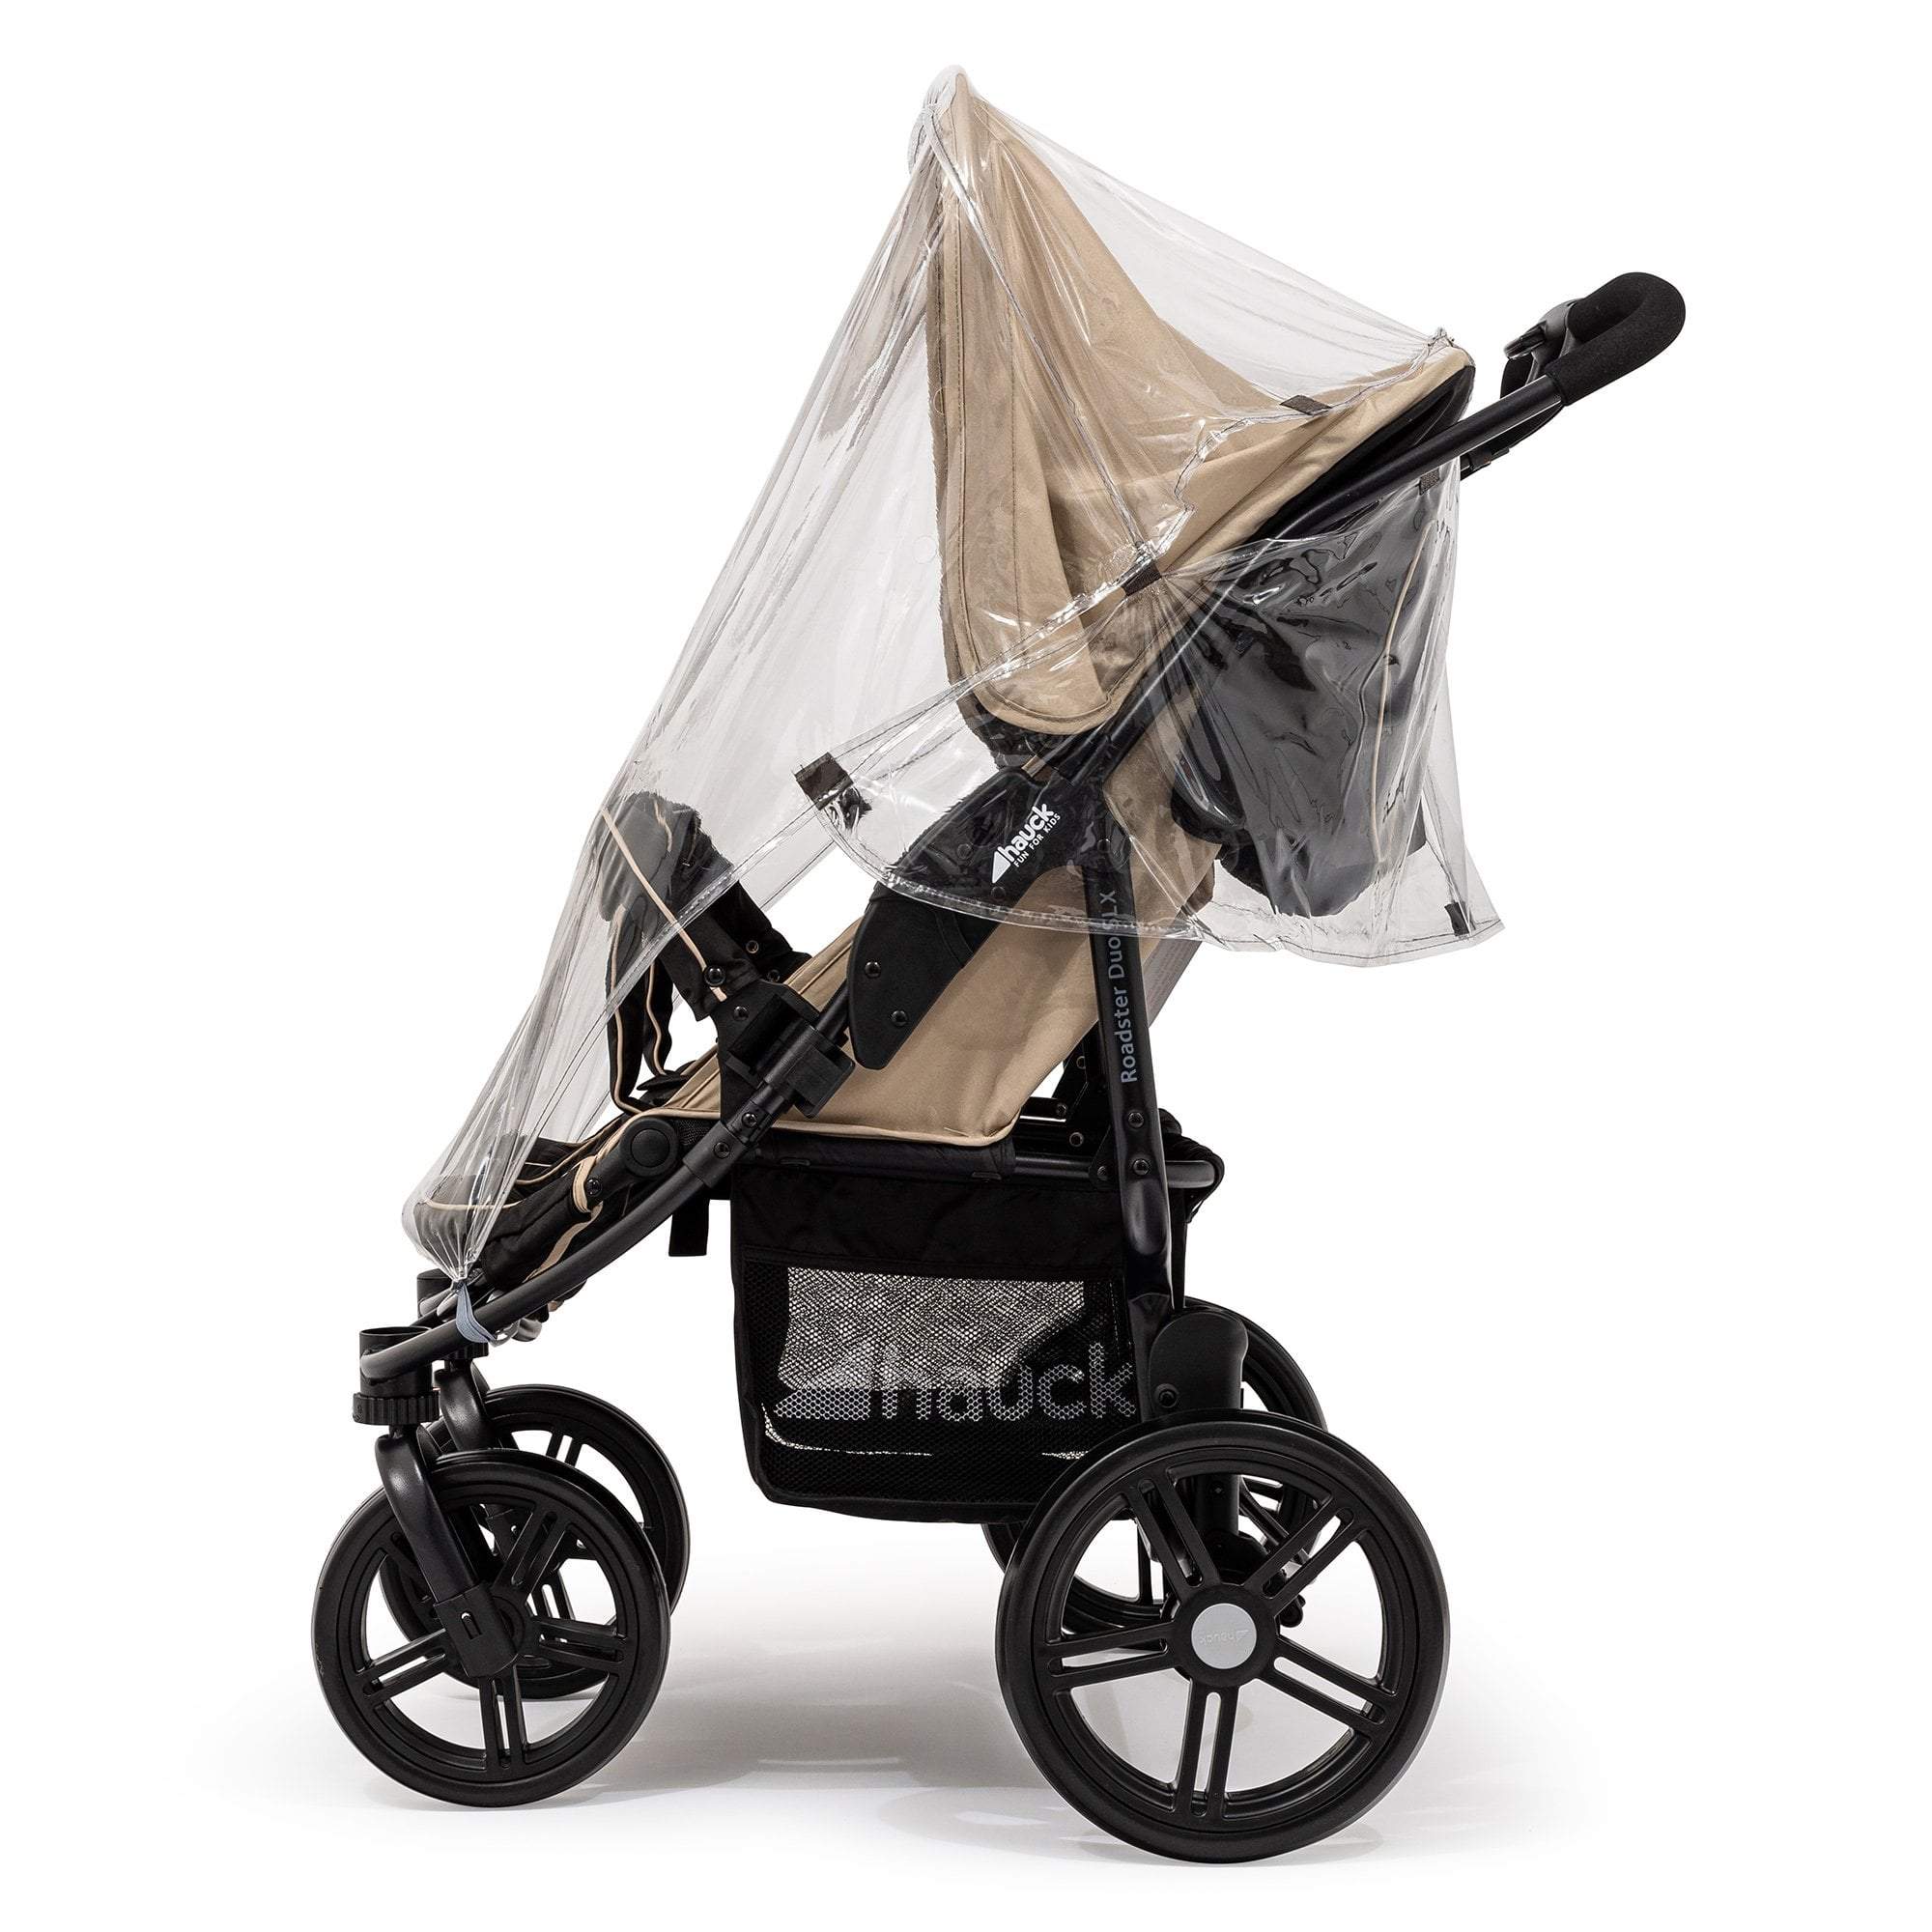 Side by Side Raincover Compatible with Bebecar - For Your Little One